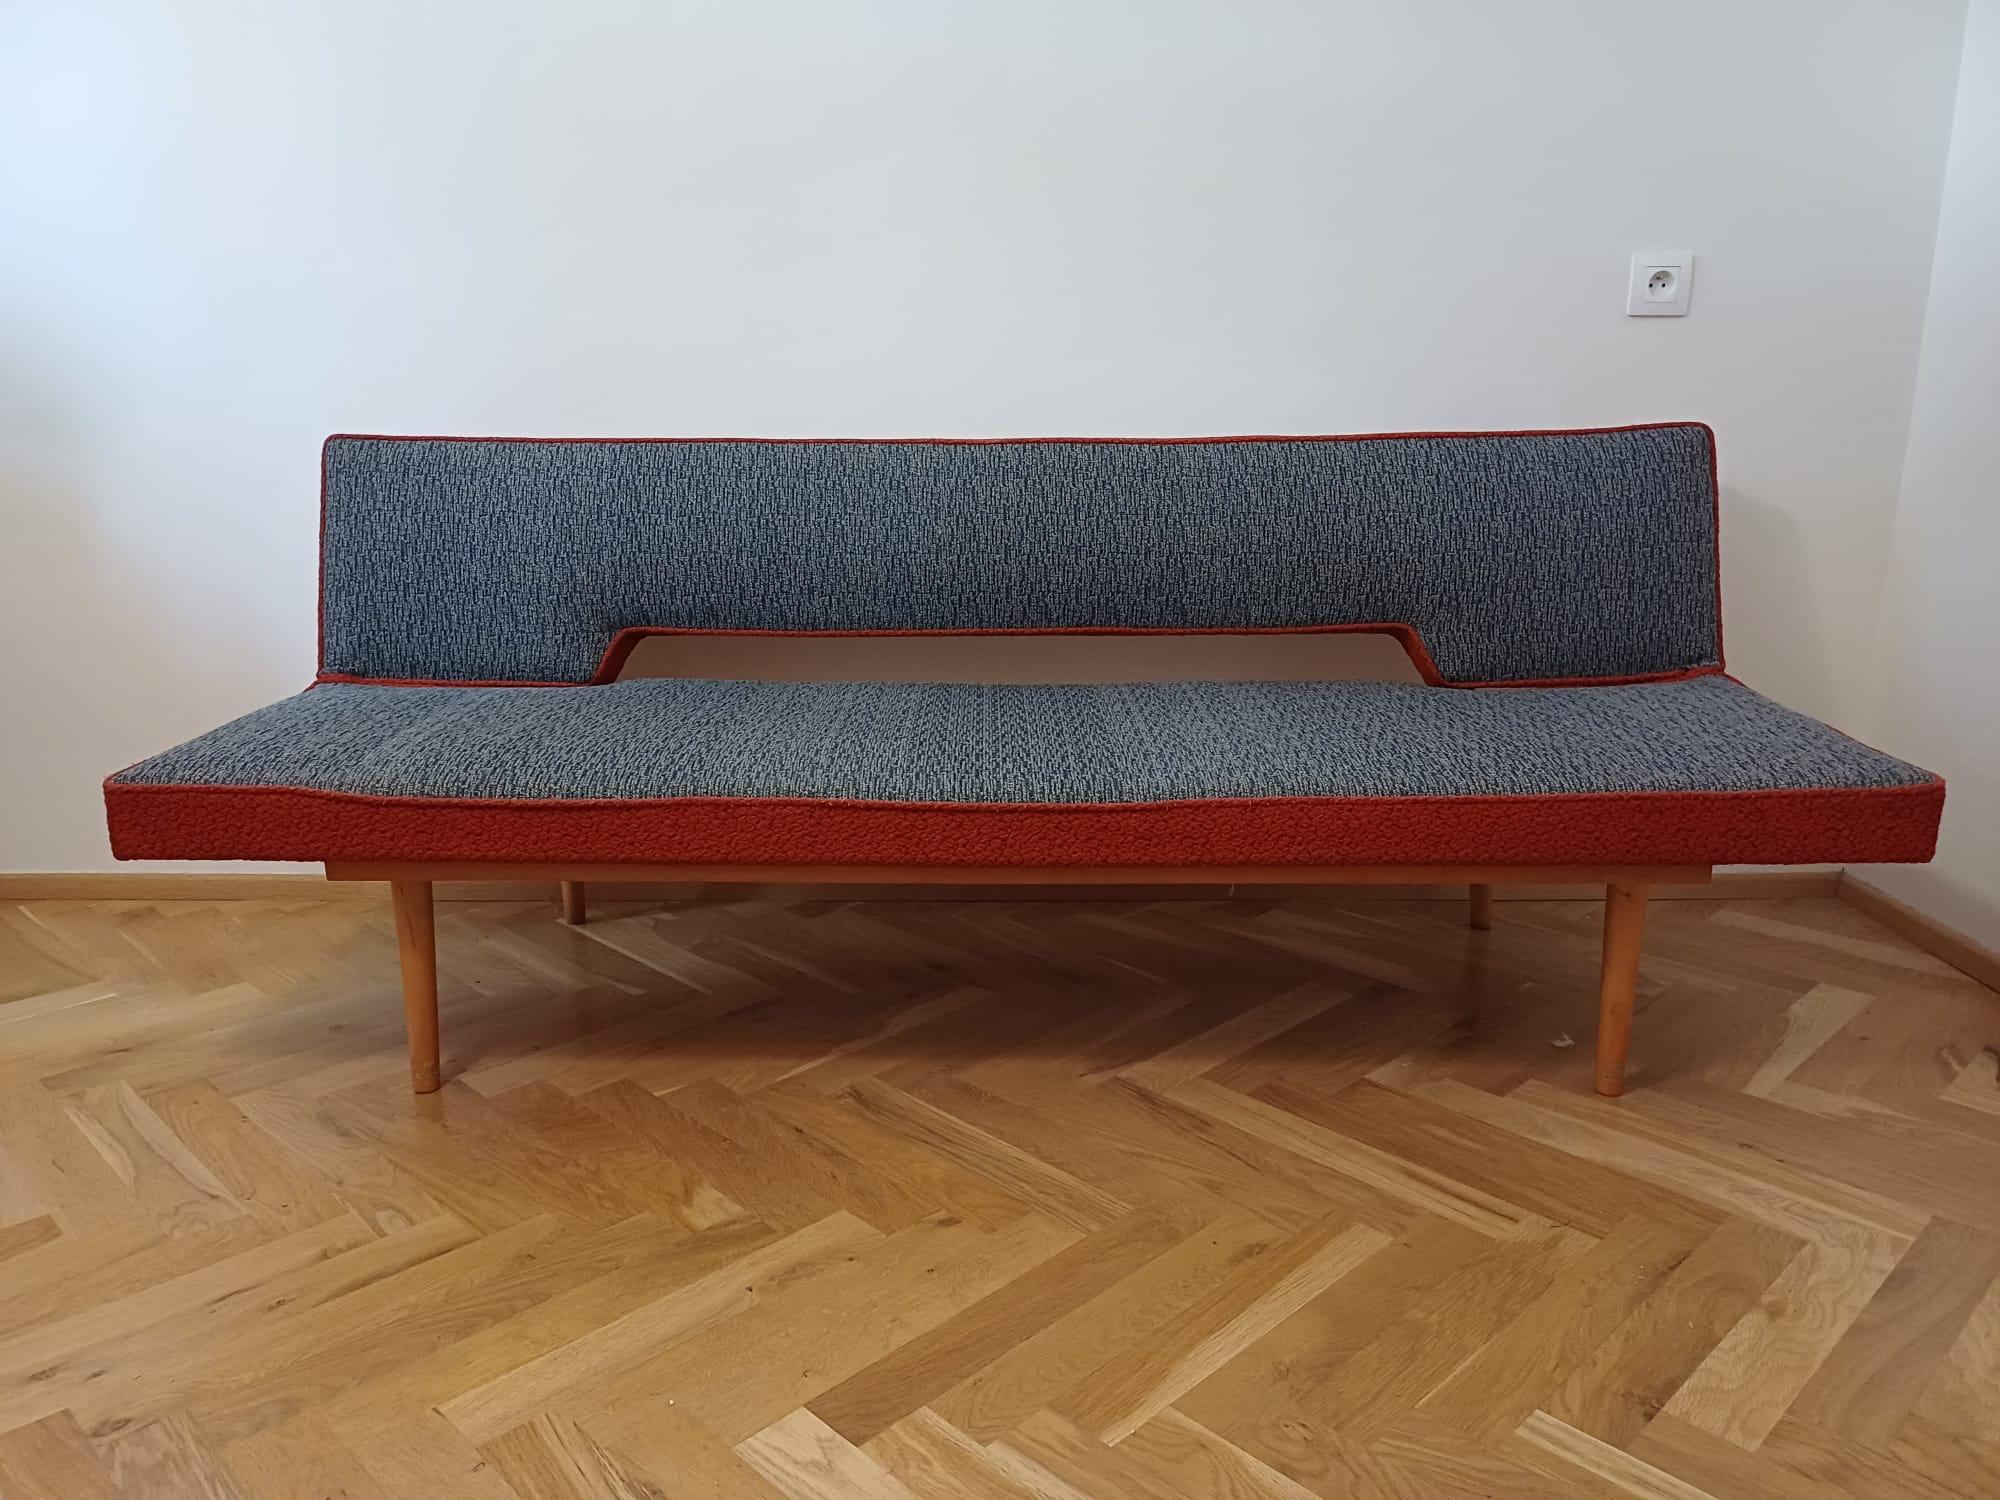 Czech Midcentury Sofa or Daybed designed by Miroslav Navratil, 1960s. For Sale